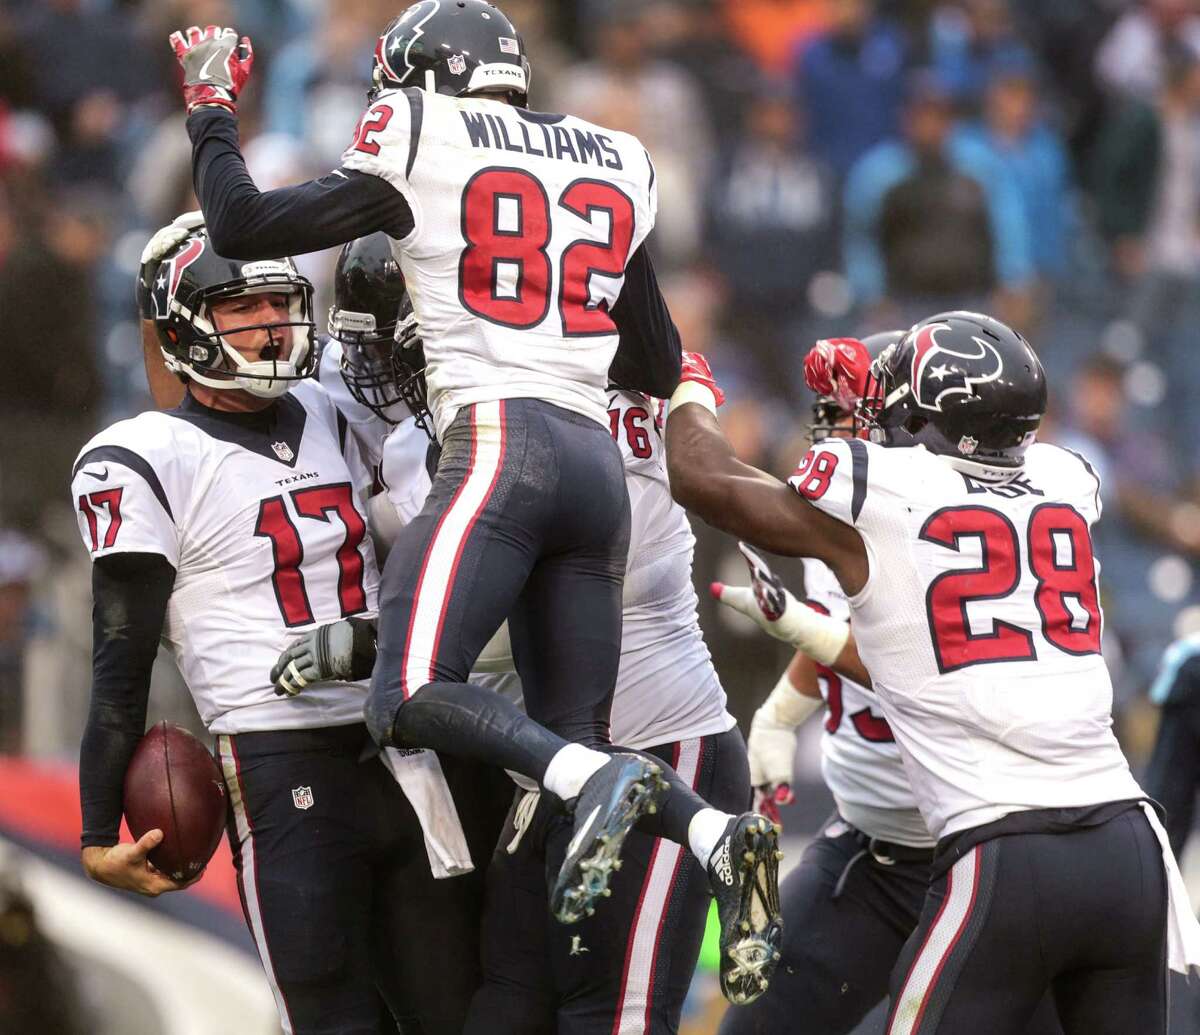 Texans QB Brock Osweiler (17) doesn't mind a little contact with teammates after scoring on a 1-yard run in Sunday's regular-season finale at Tennessee. The Texans can also celebrate the NFL's No. 1 defense heading into the postseason.